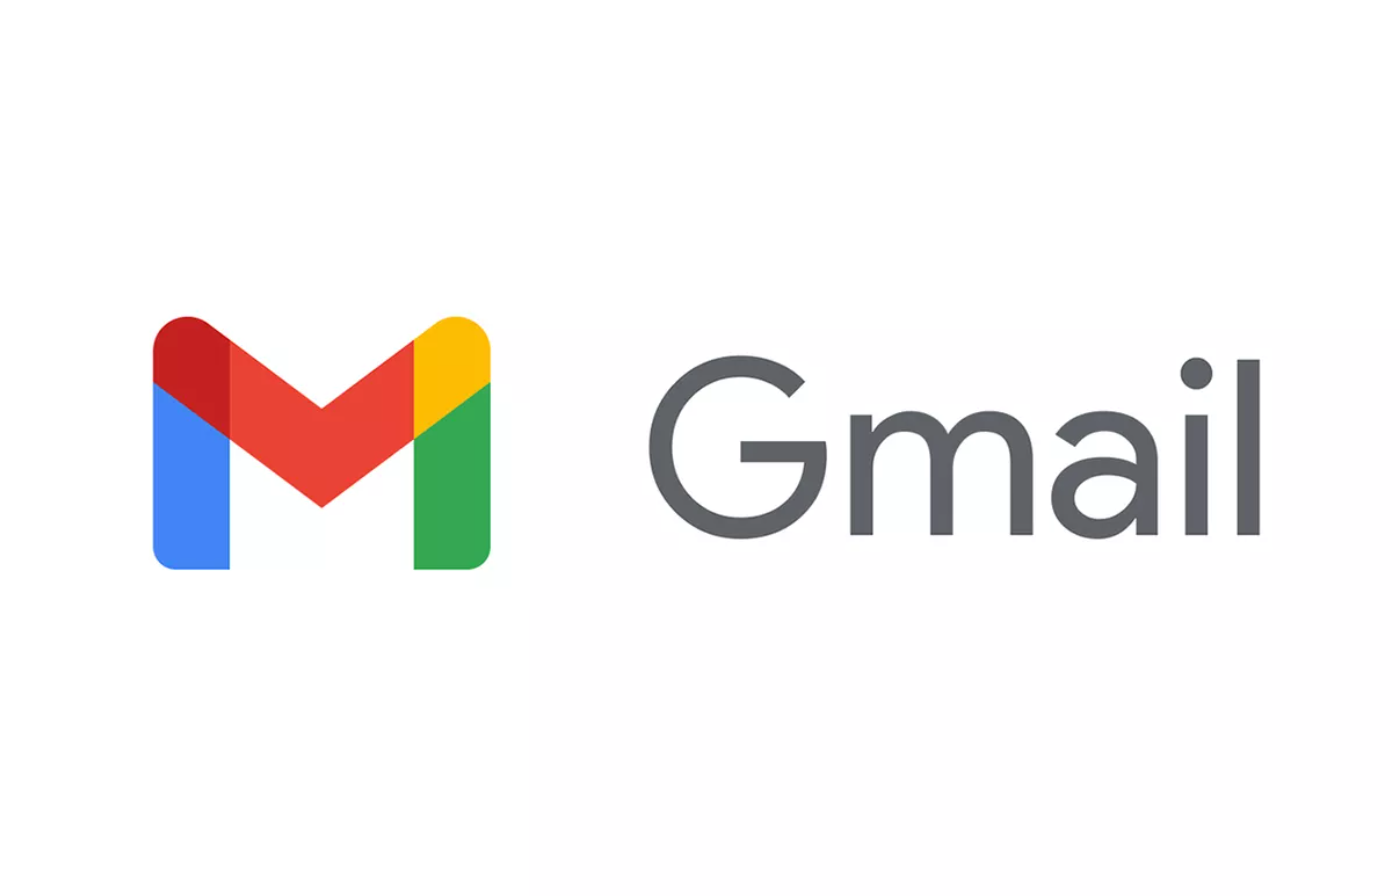 Google revamps Gmail logo, design more in line with other apps